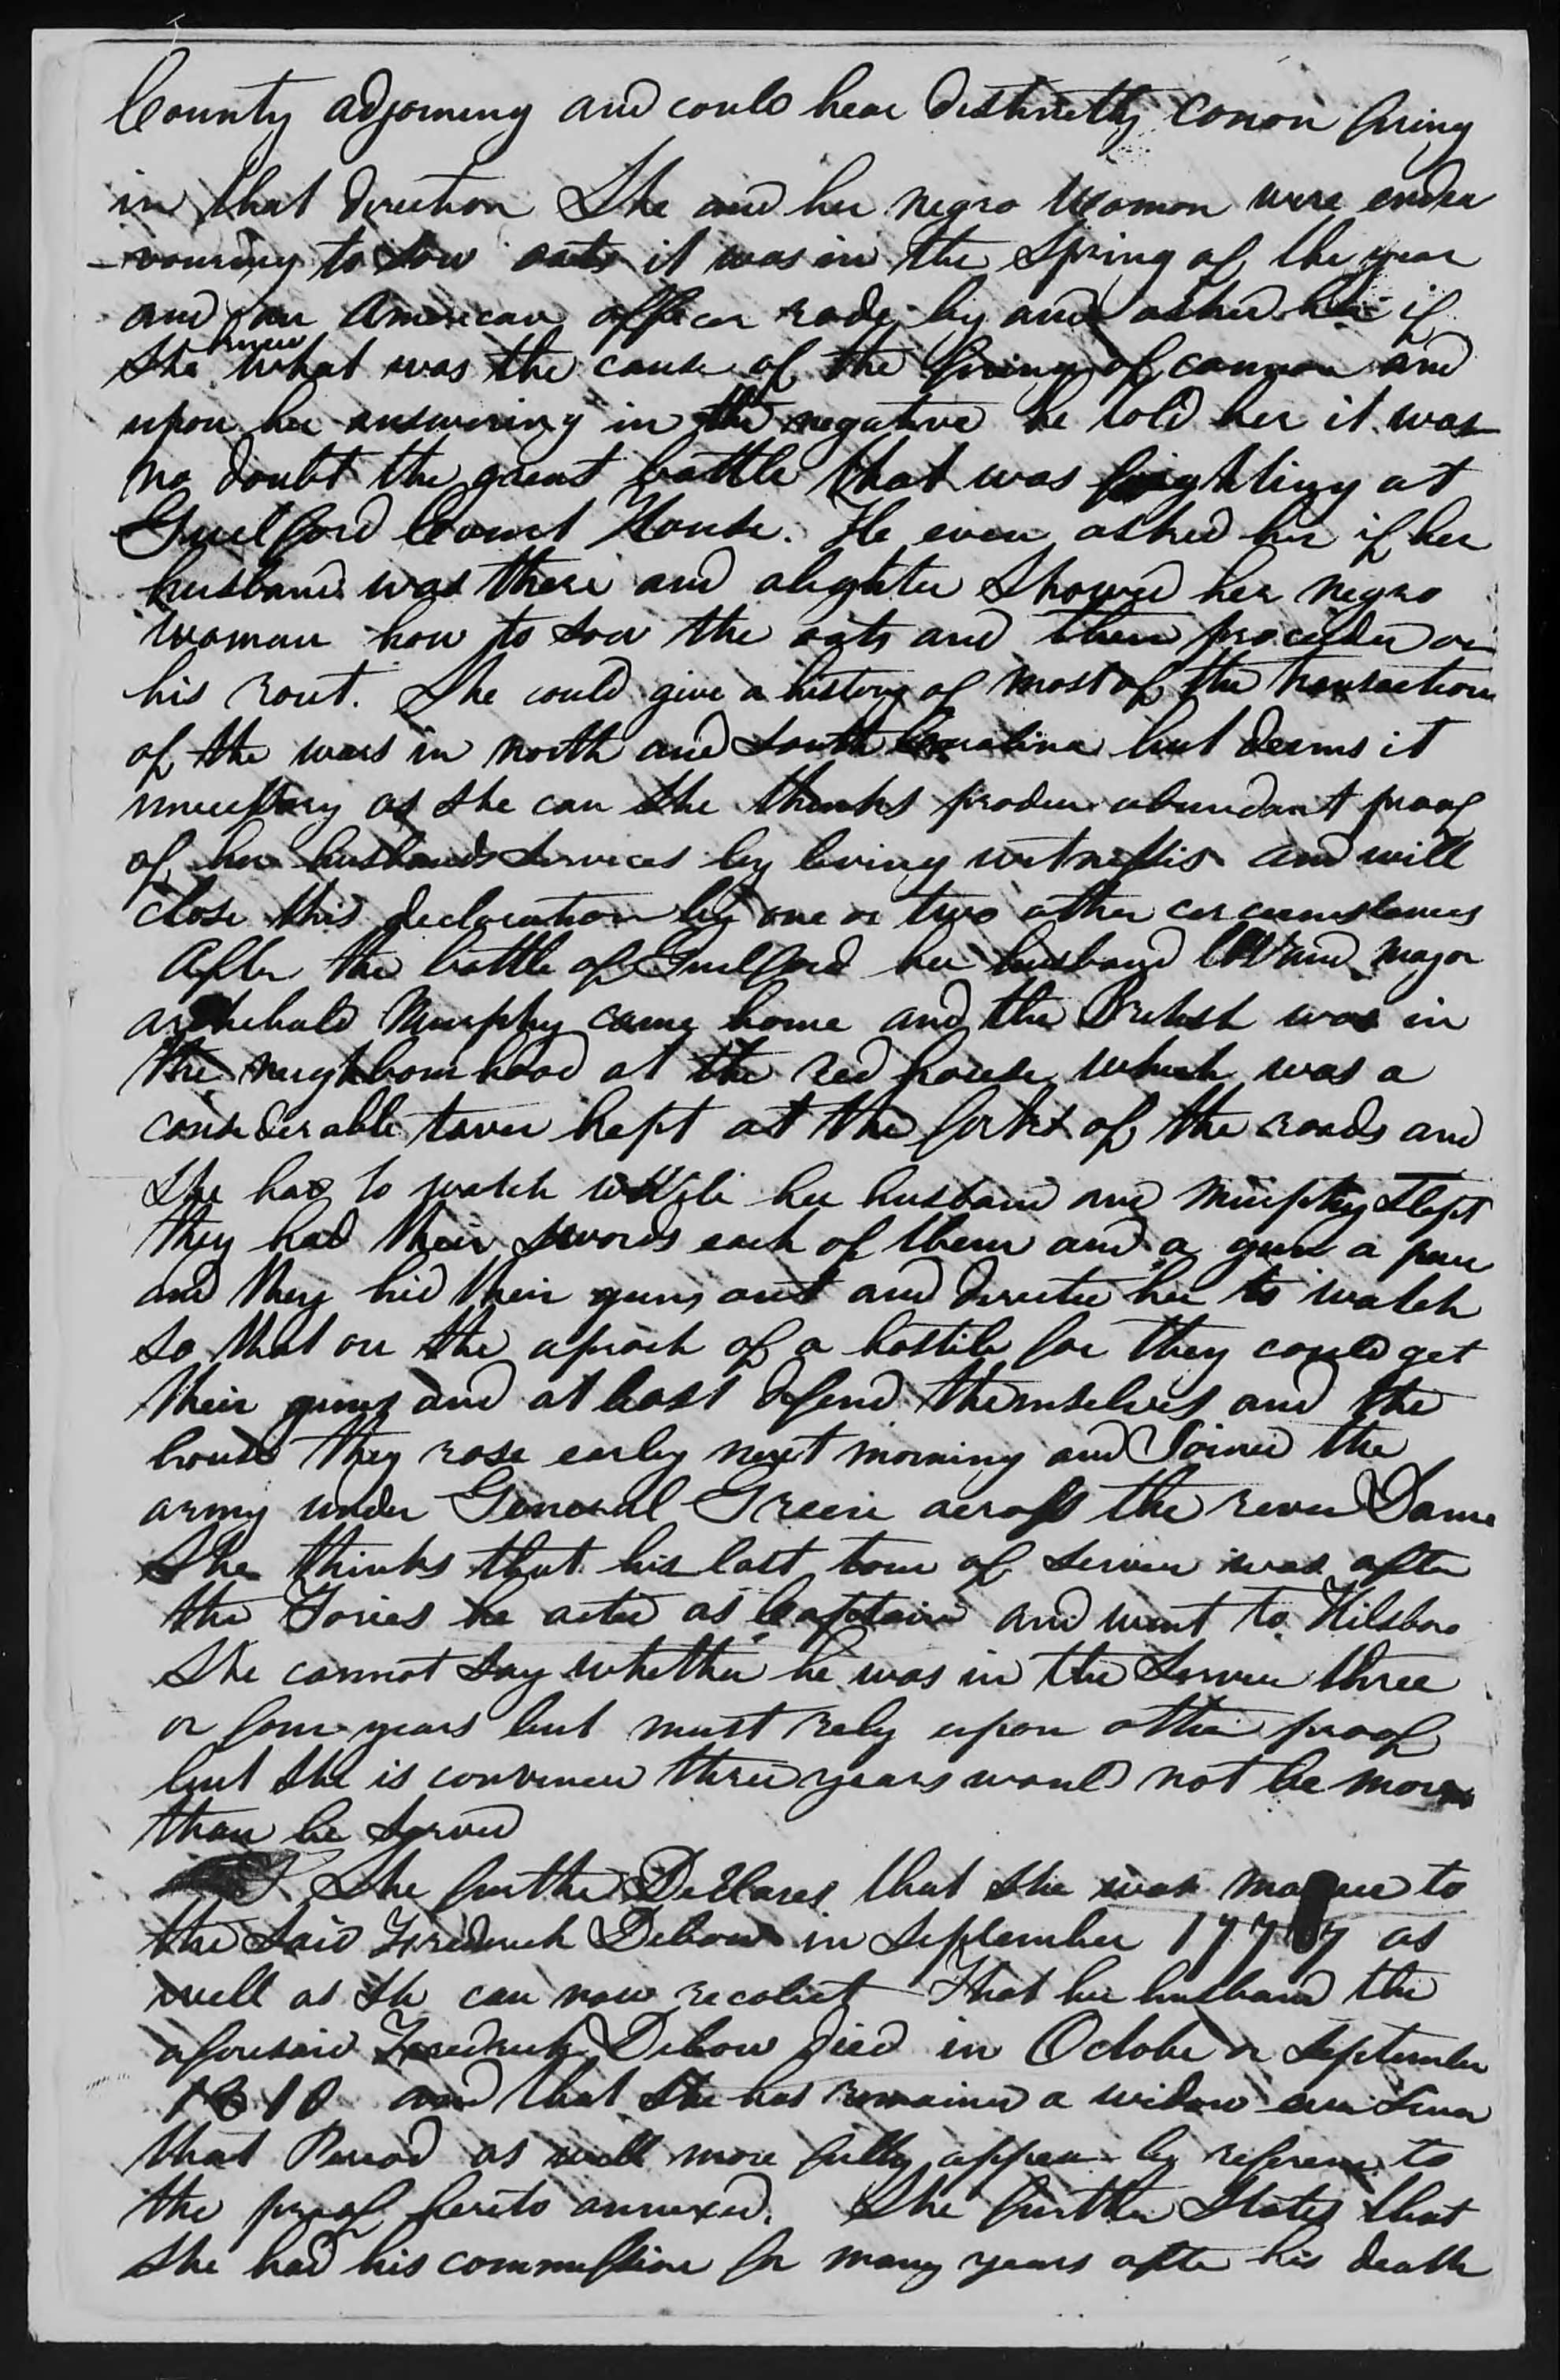 Application for a Widow's Pension from Rachel Debow, 1 July 1837, page 2